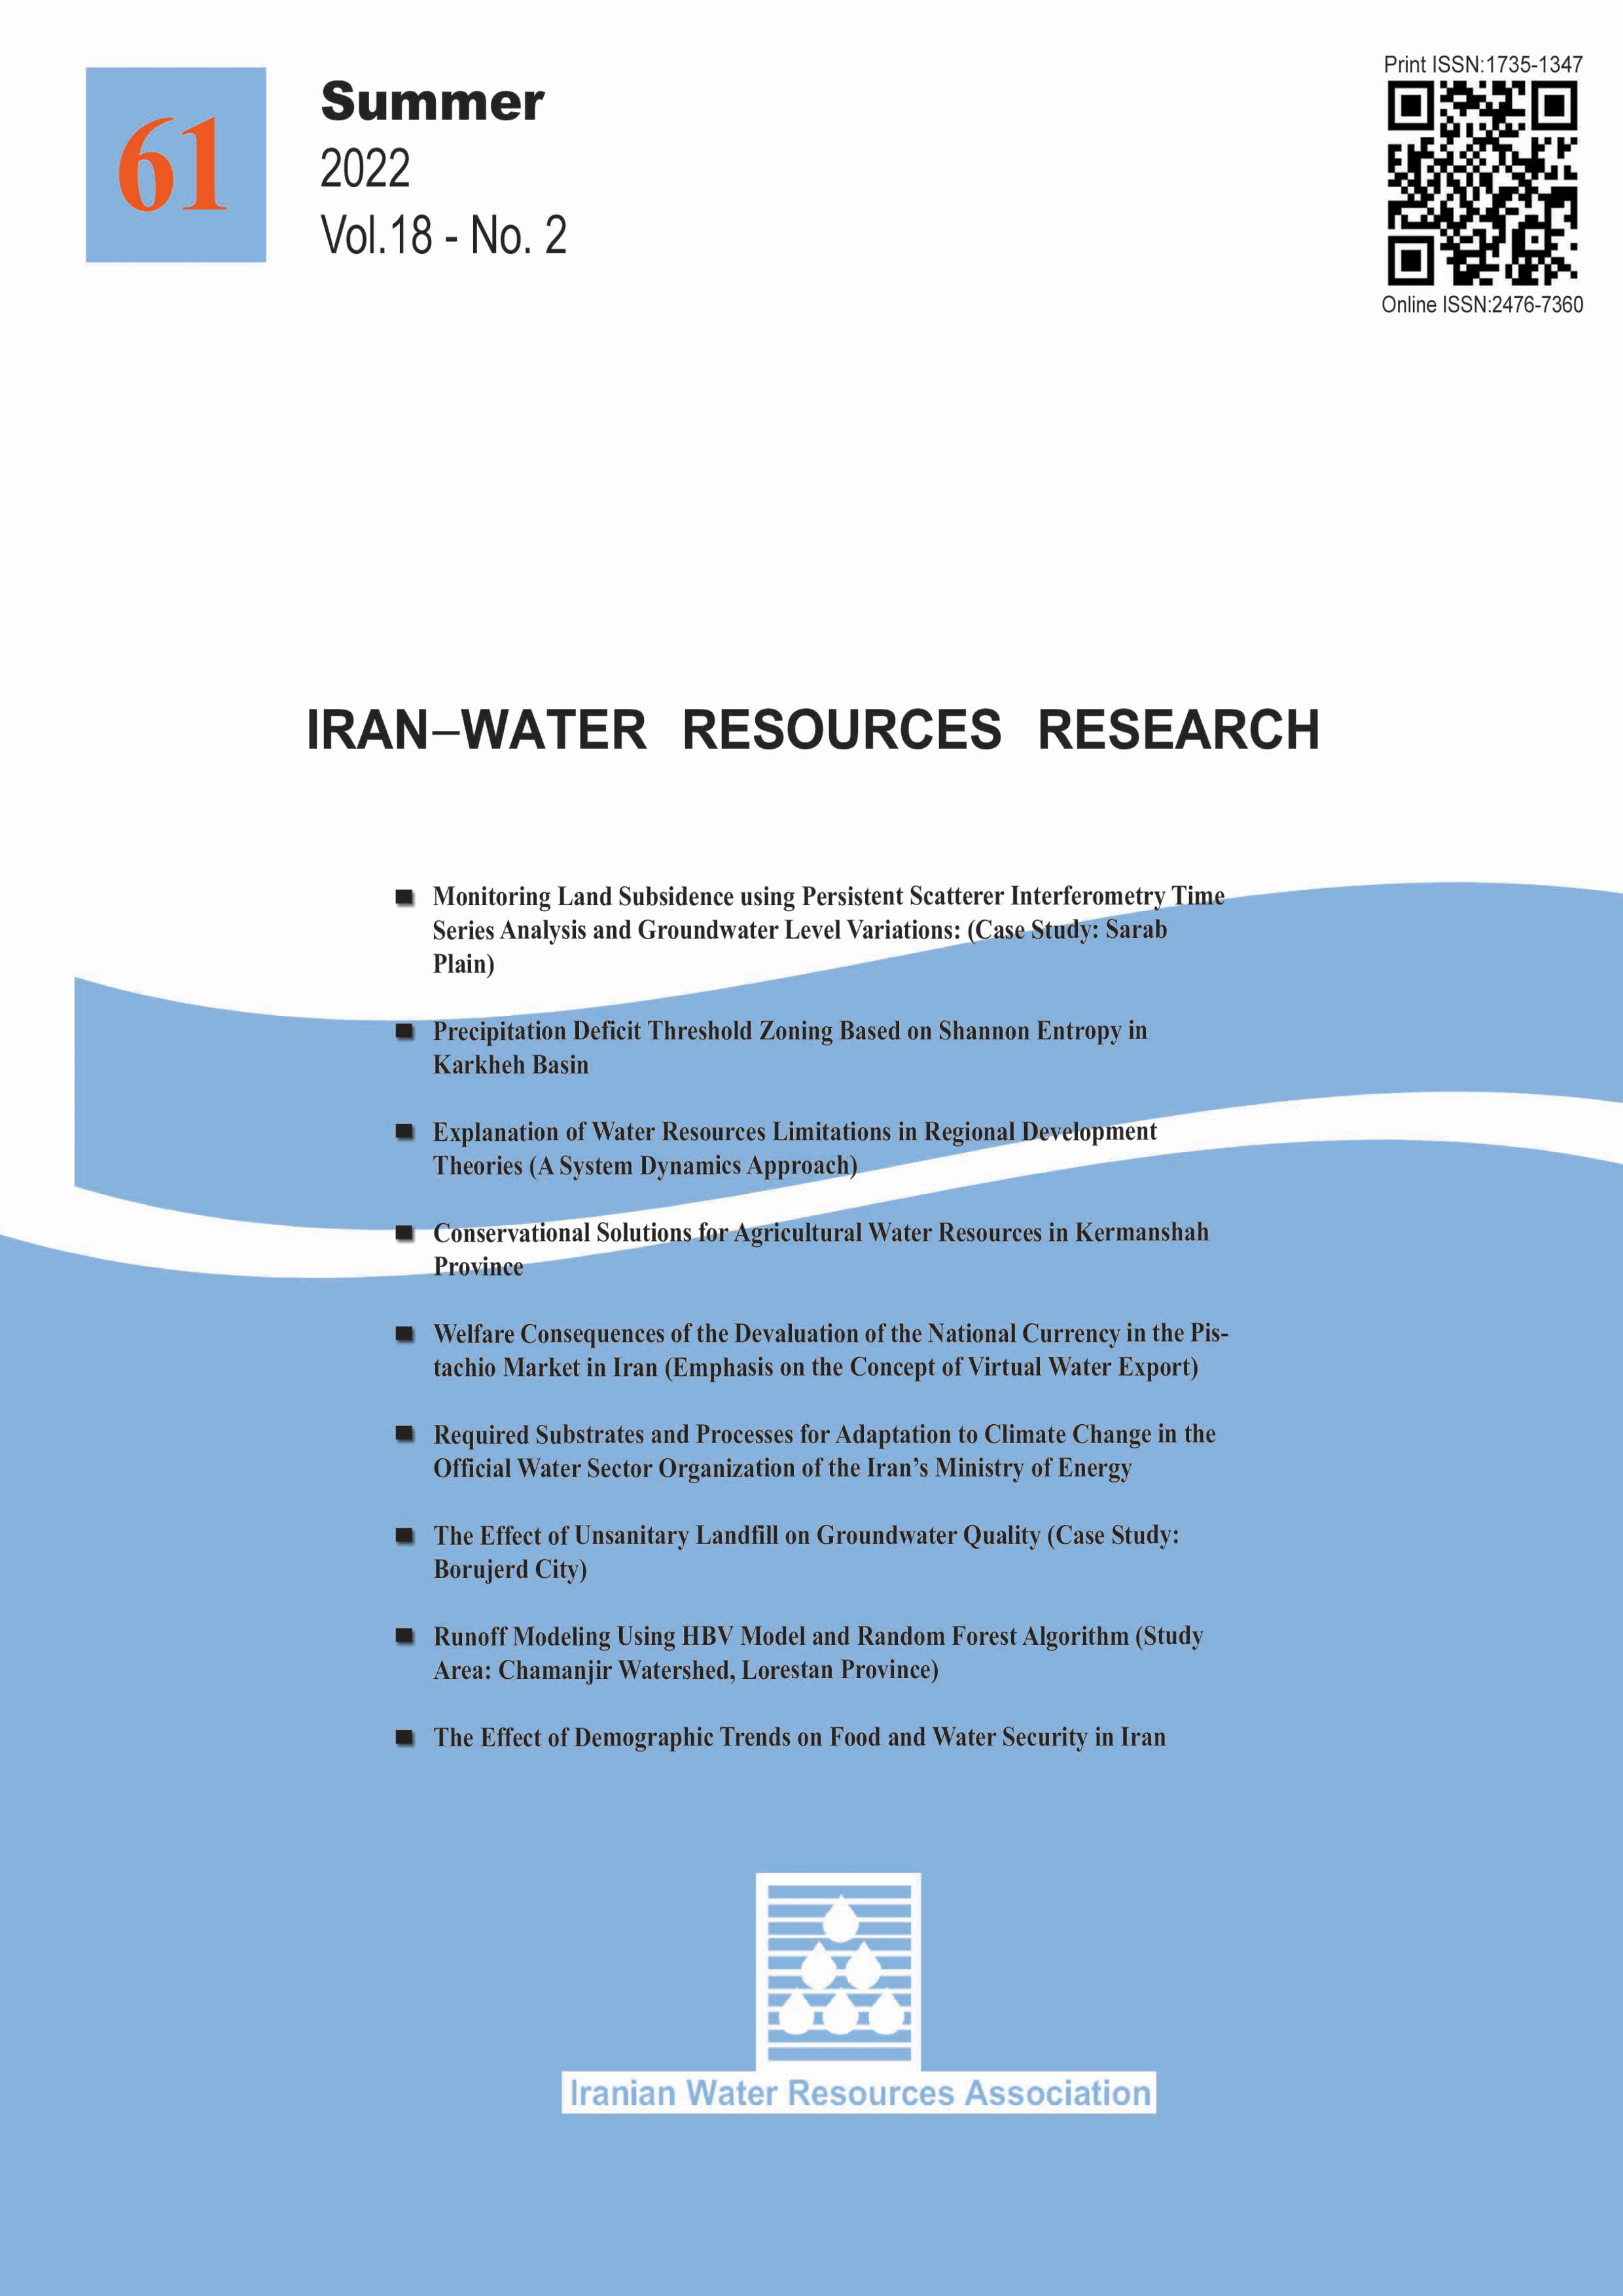 Iran-Water Resources Research